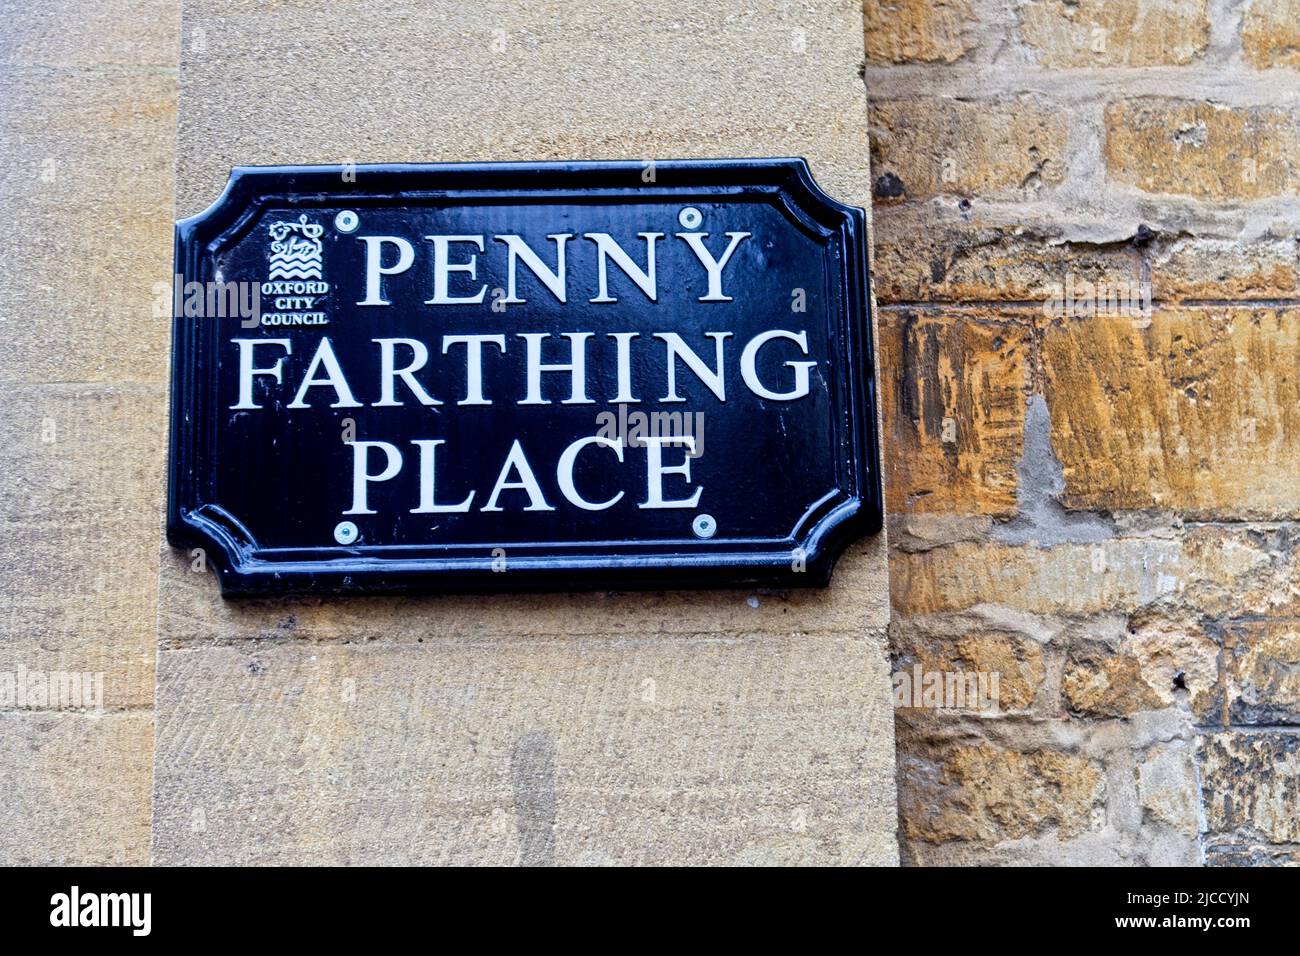 A sign on a wall in Oxford for Penny Farthing Place Stock Photo